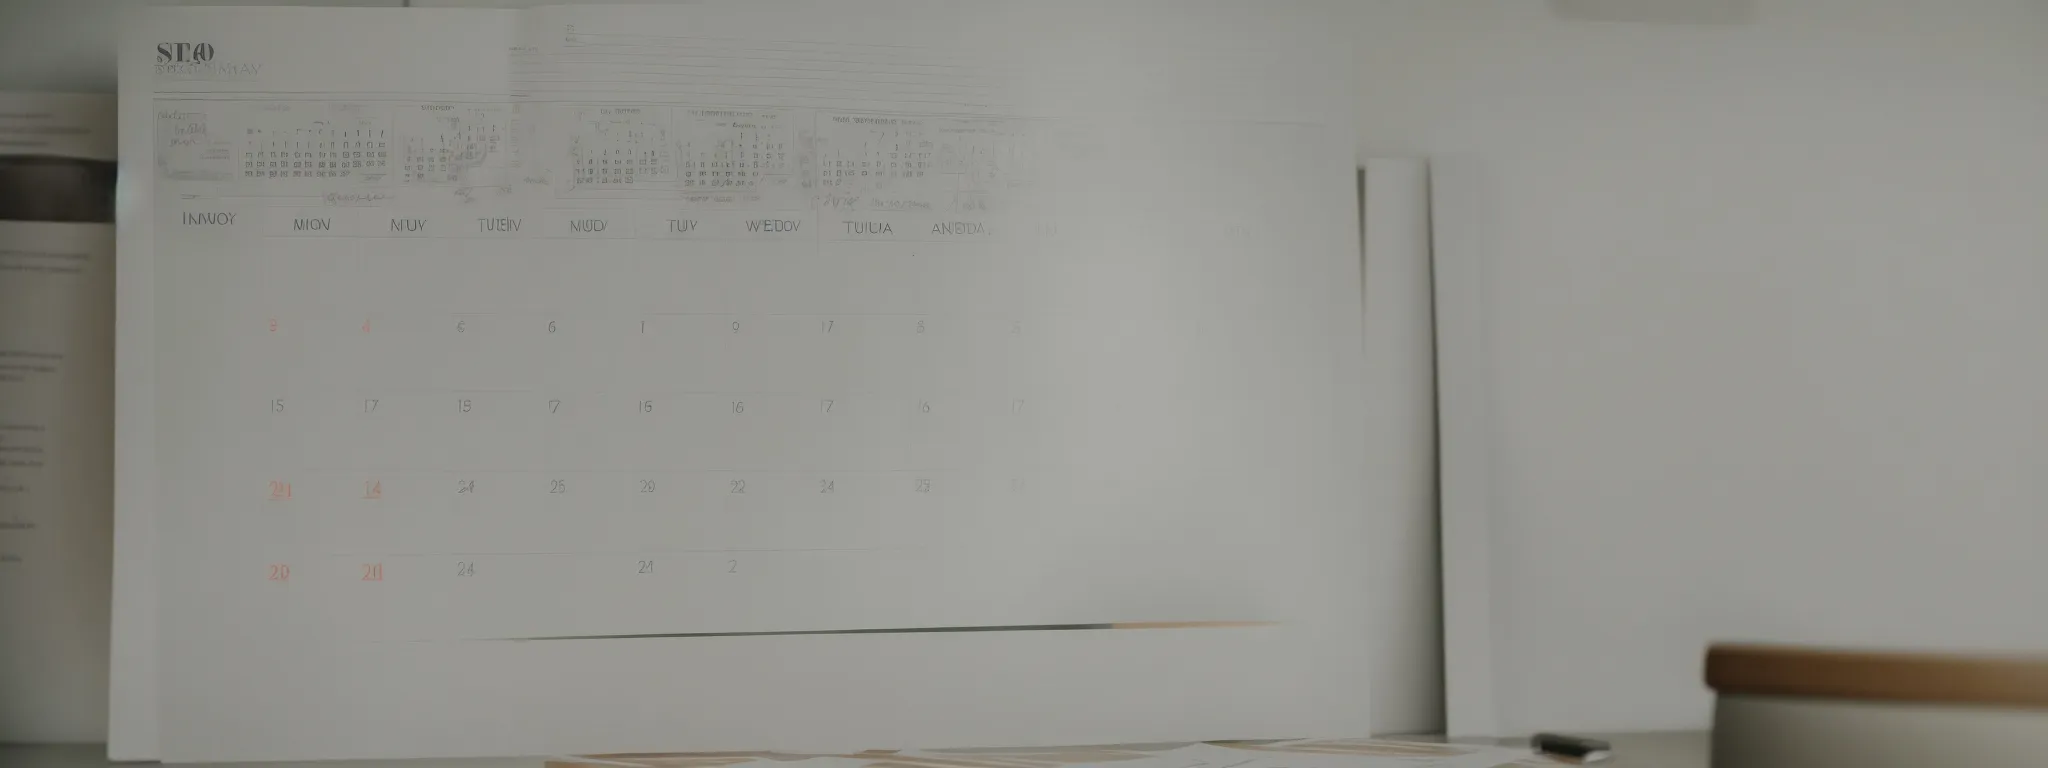 a calendar with marked dates on a desk surrounded by seo strategy documents.